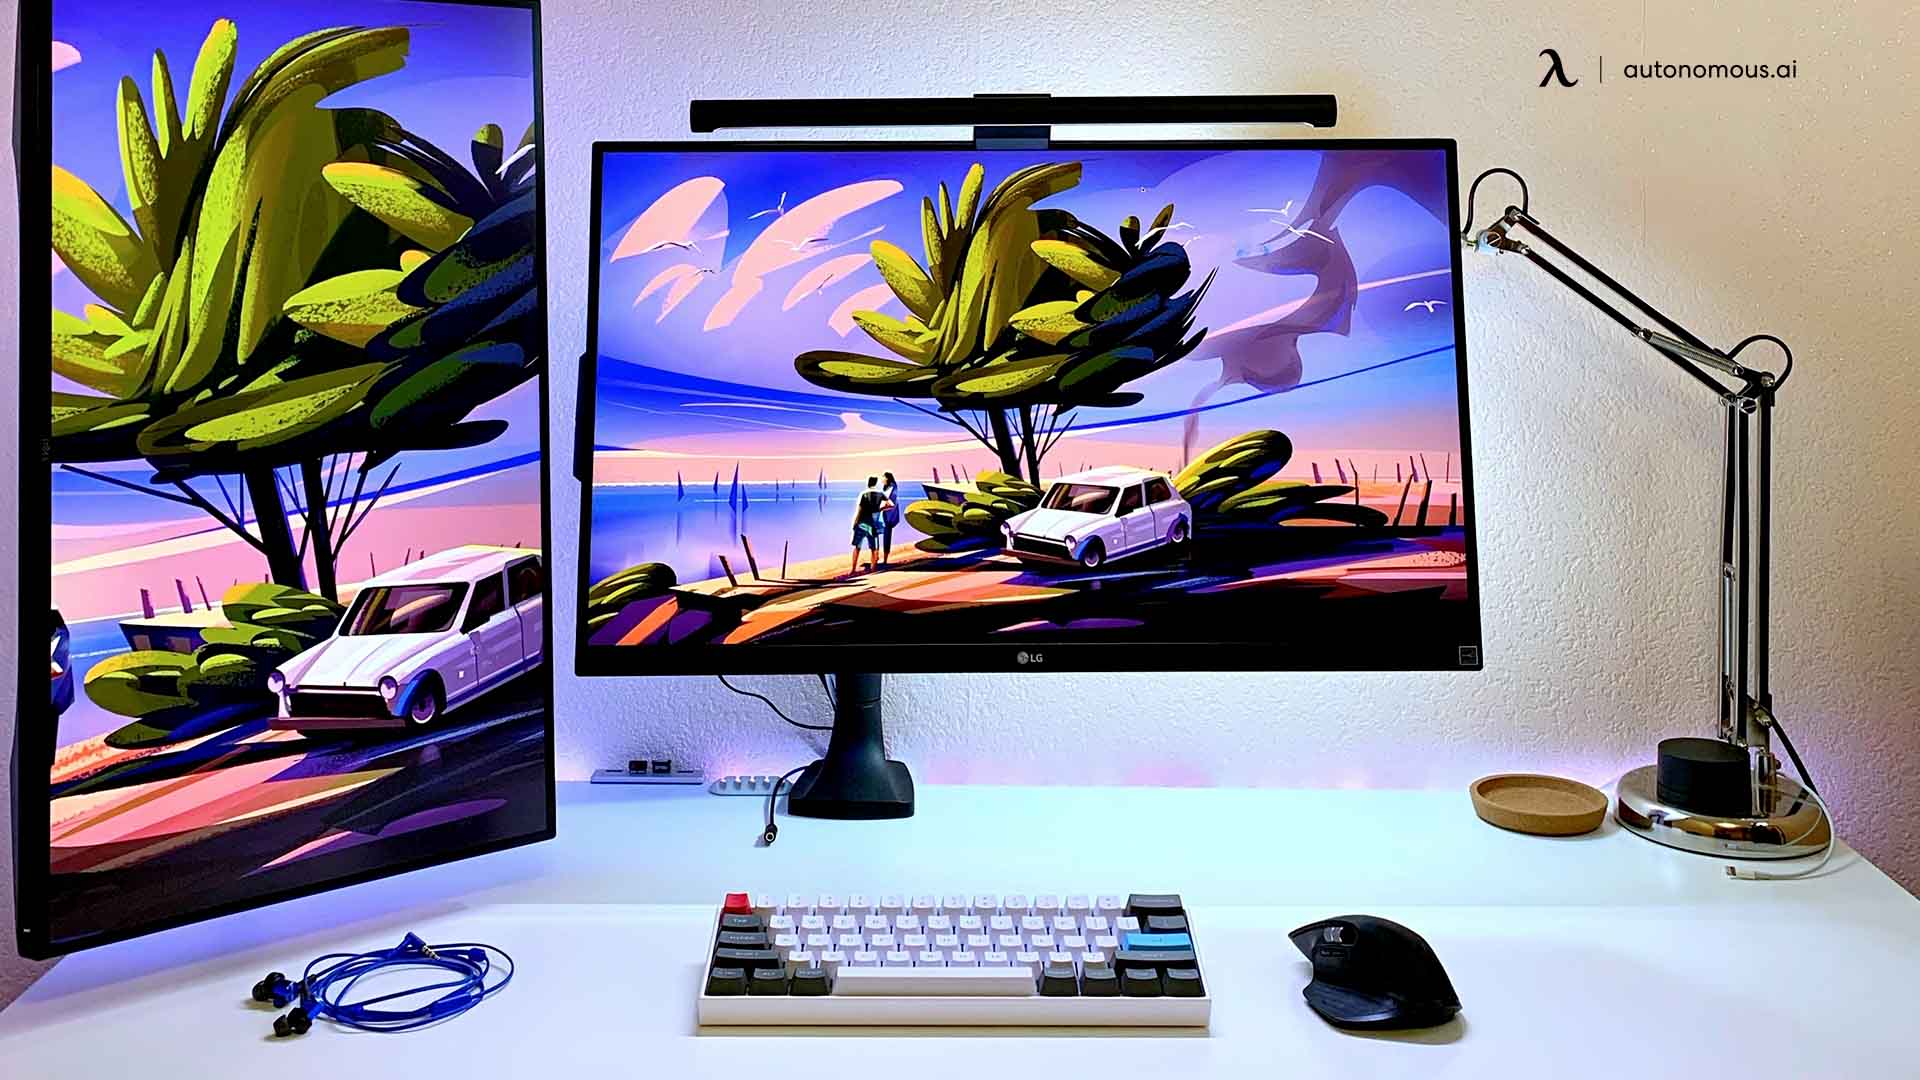 https://cdn.autonomous.ai/static/upload/images/new_post/a-complete-gaming-desk-cable-management-guide-with-5-steps-2104.jpg